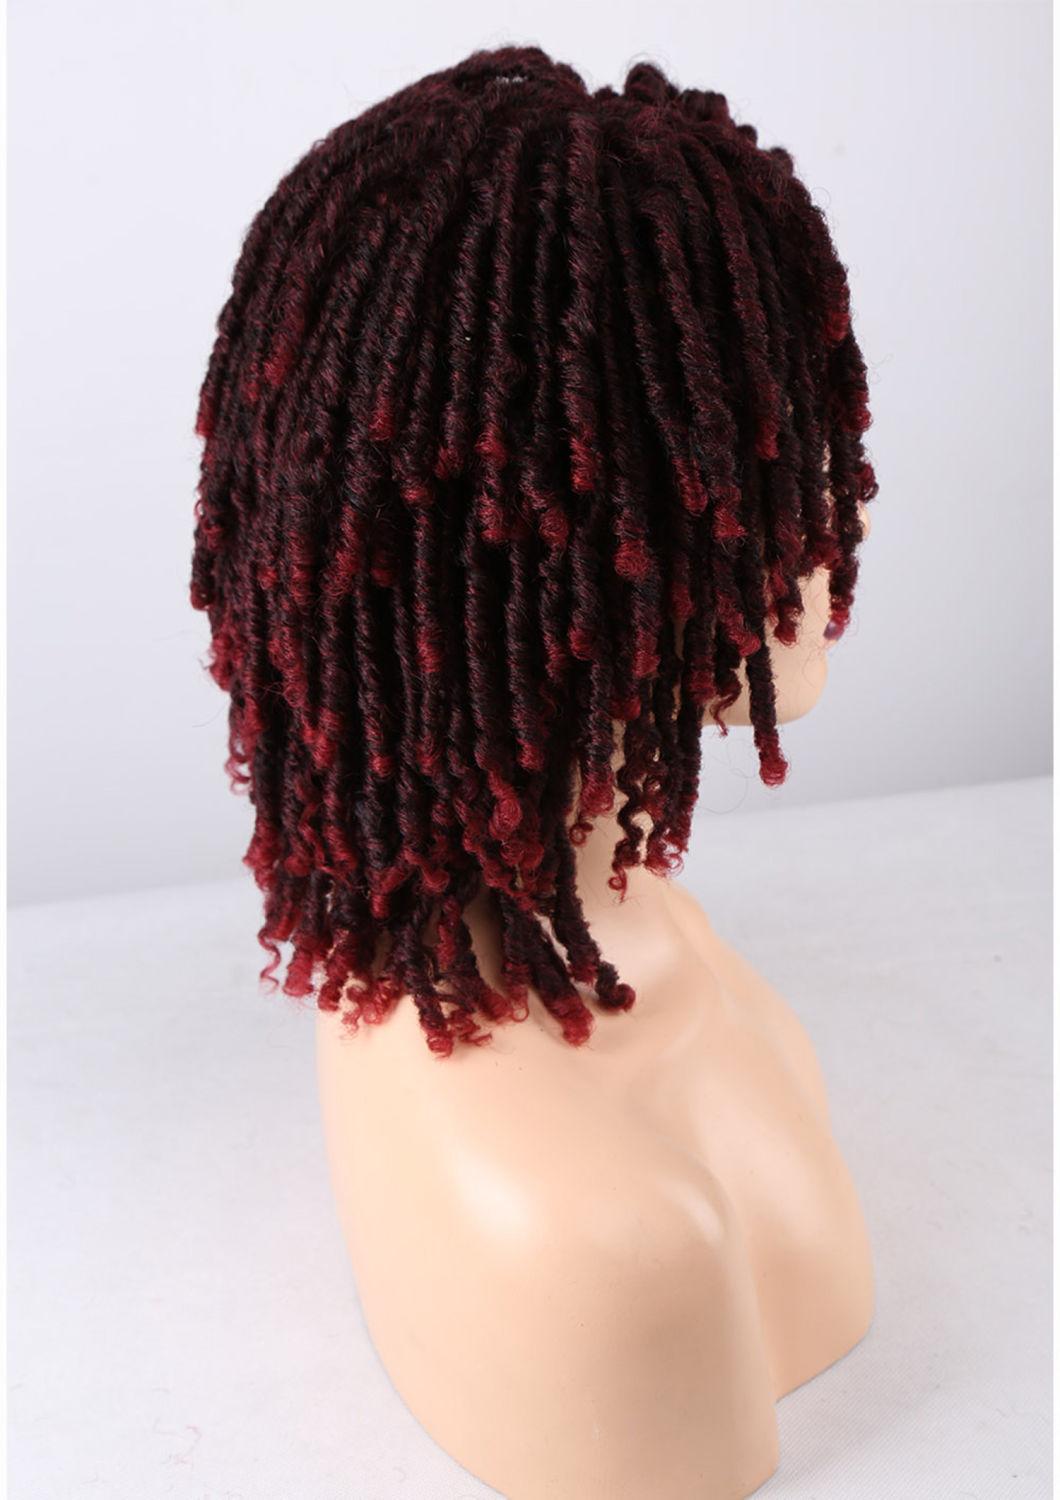 Short Twist Curly Wig Multi Color for Black Women and Men Afro Synthetic Crochet Hair Faux Locs Braid Wigs Dreadlock